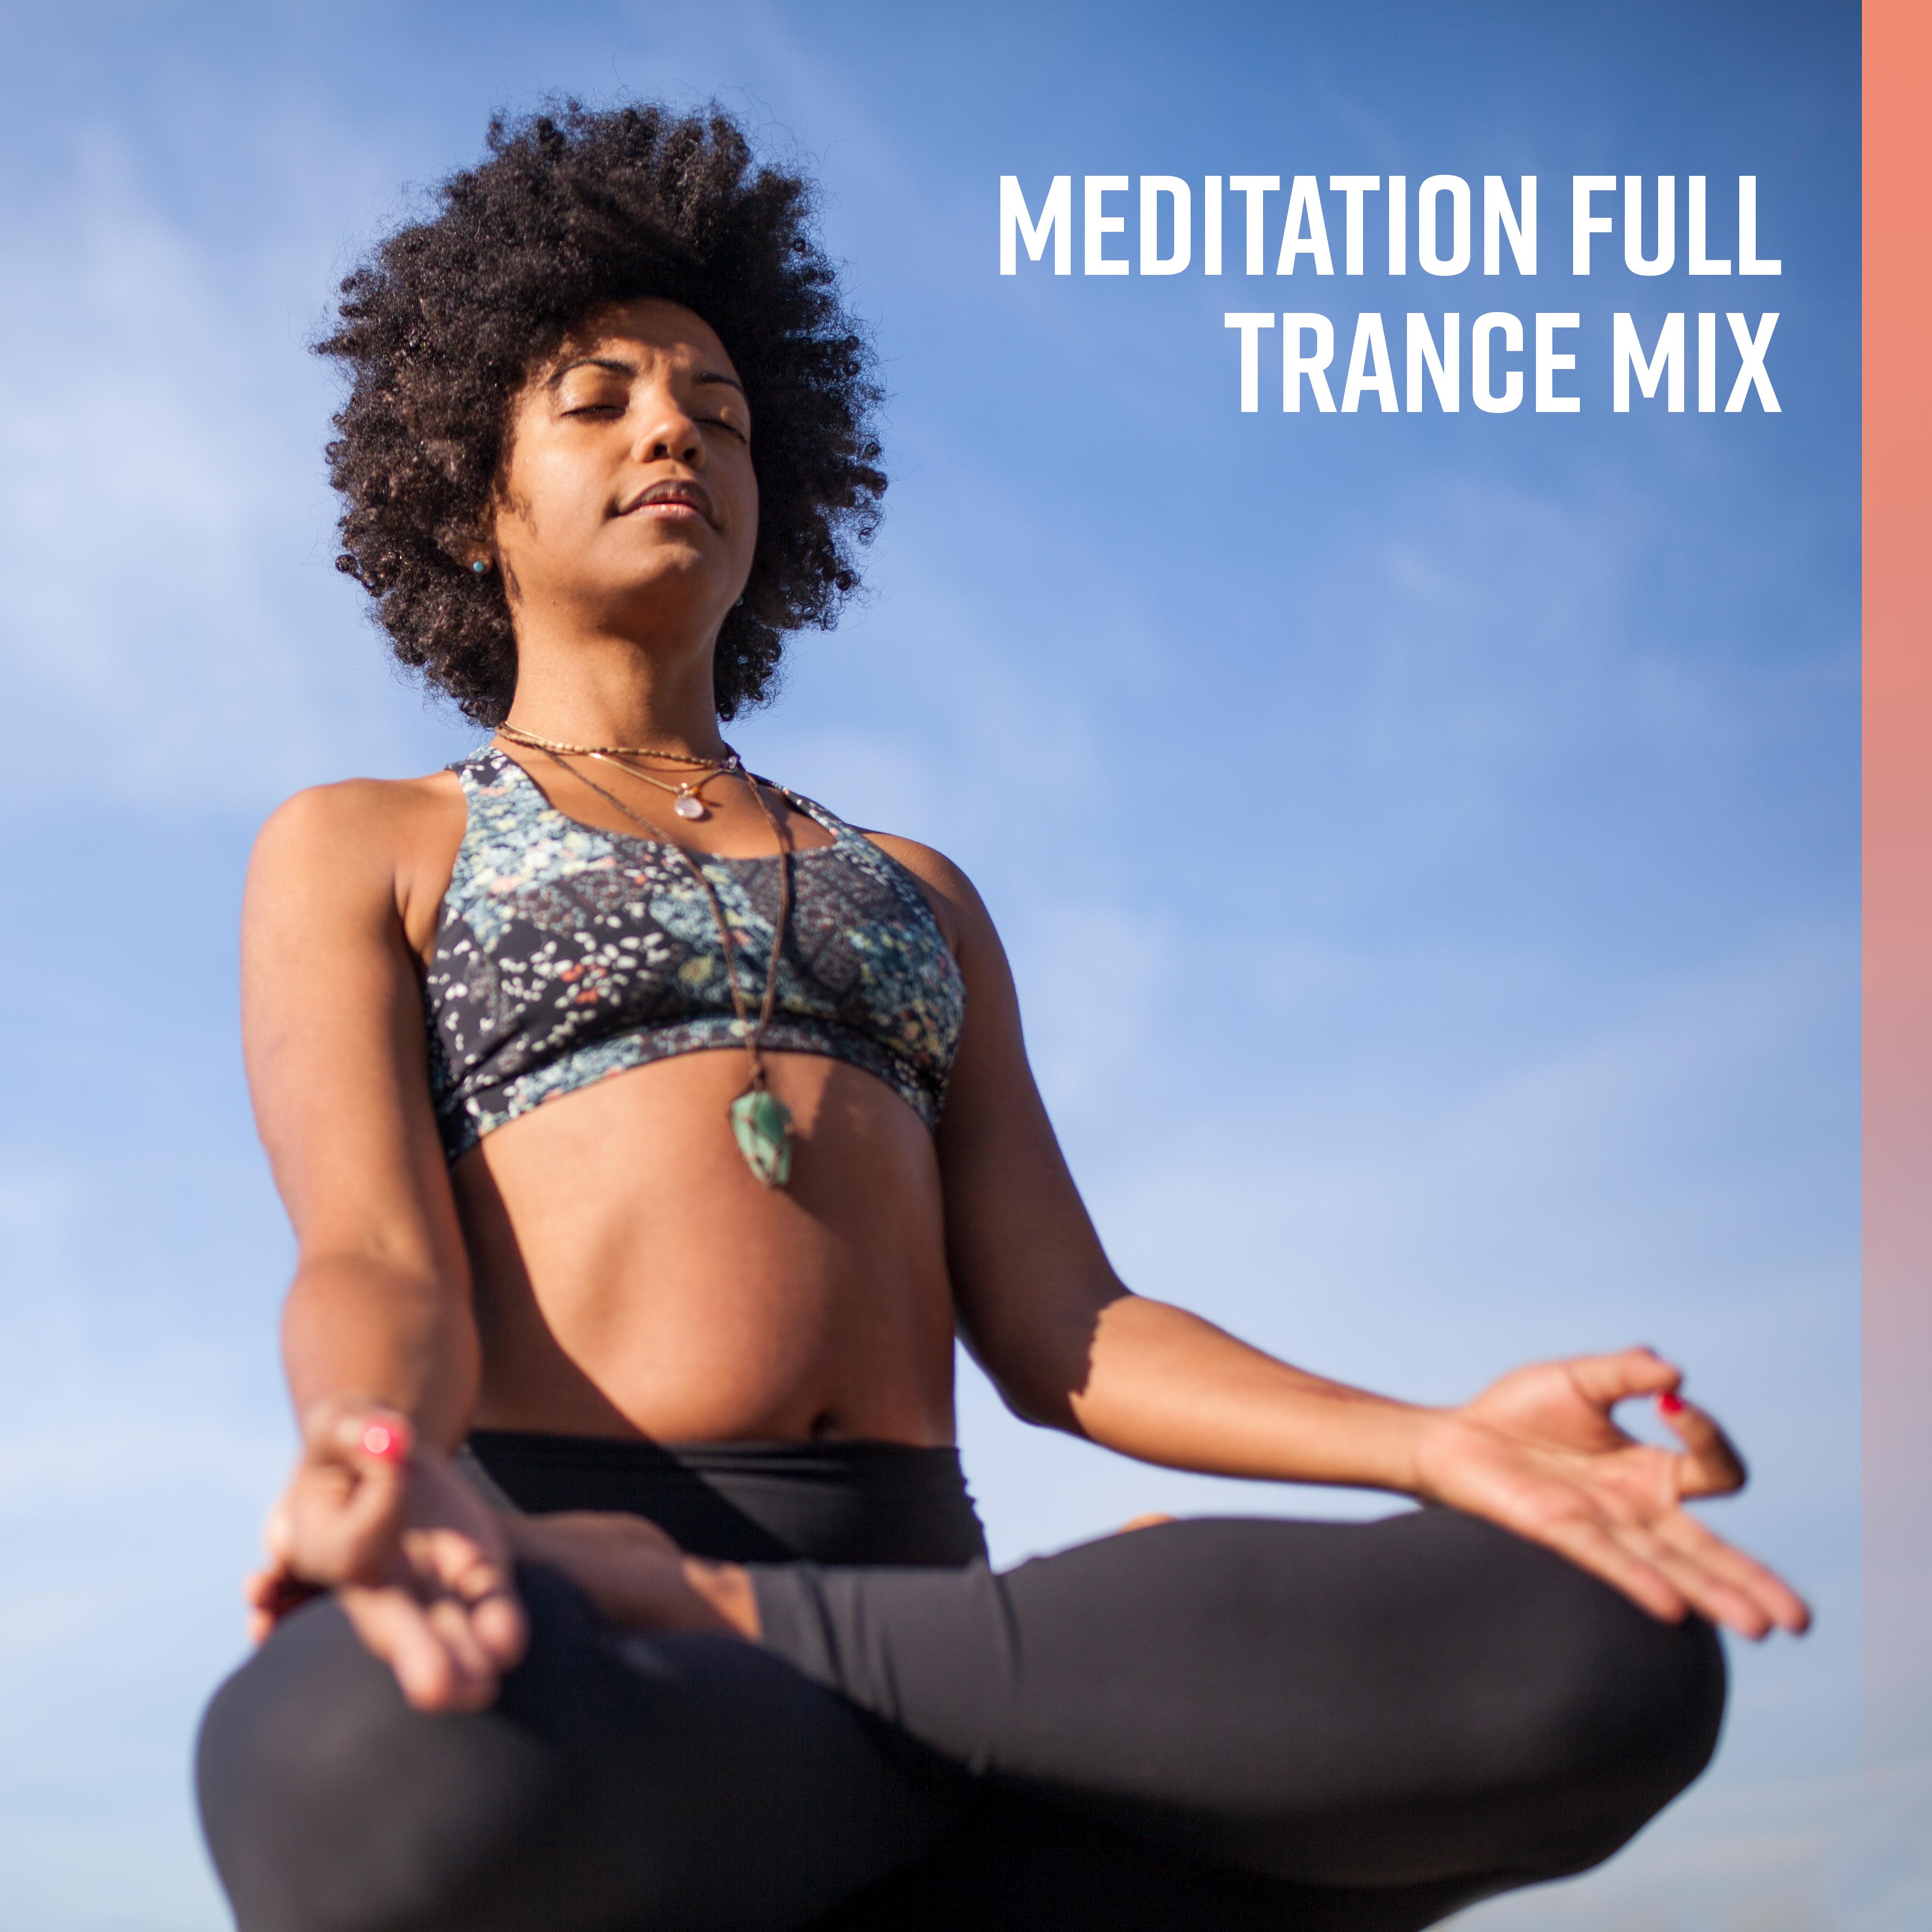 Meditation Full Trance Mix: 2019 New Age Music Compilation for Best Yoga & Deep Relaxation Experience, Internal Harmony, Inner Energy Increase, Chakra Healing